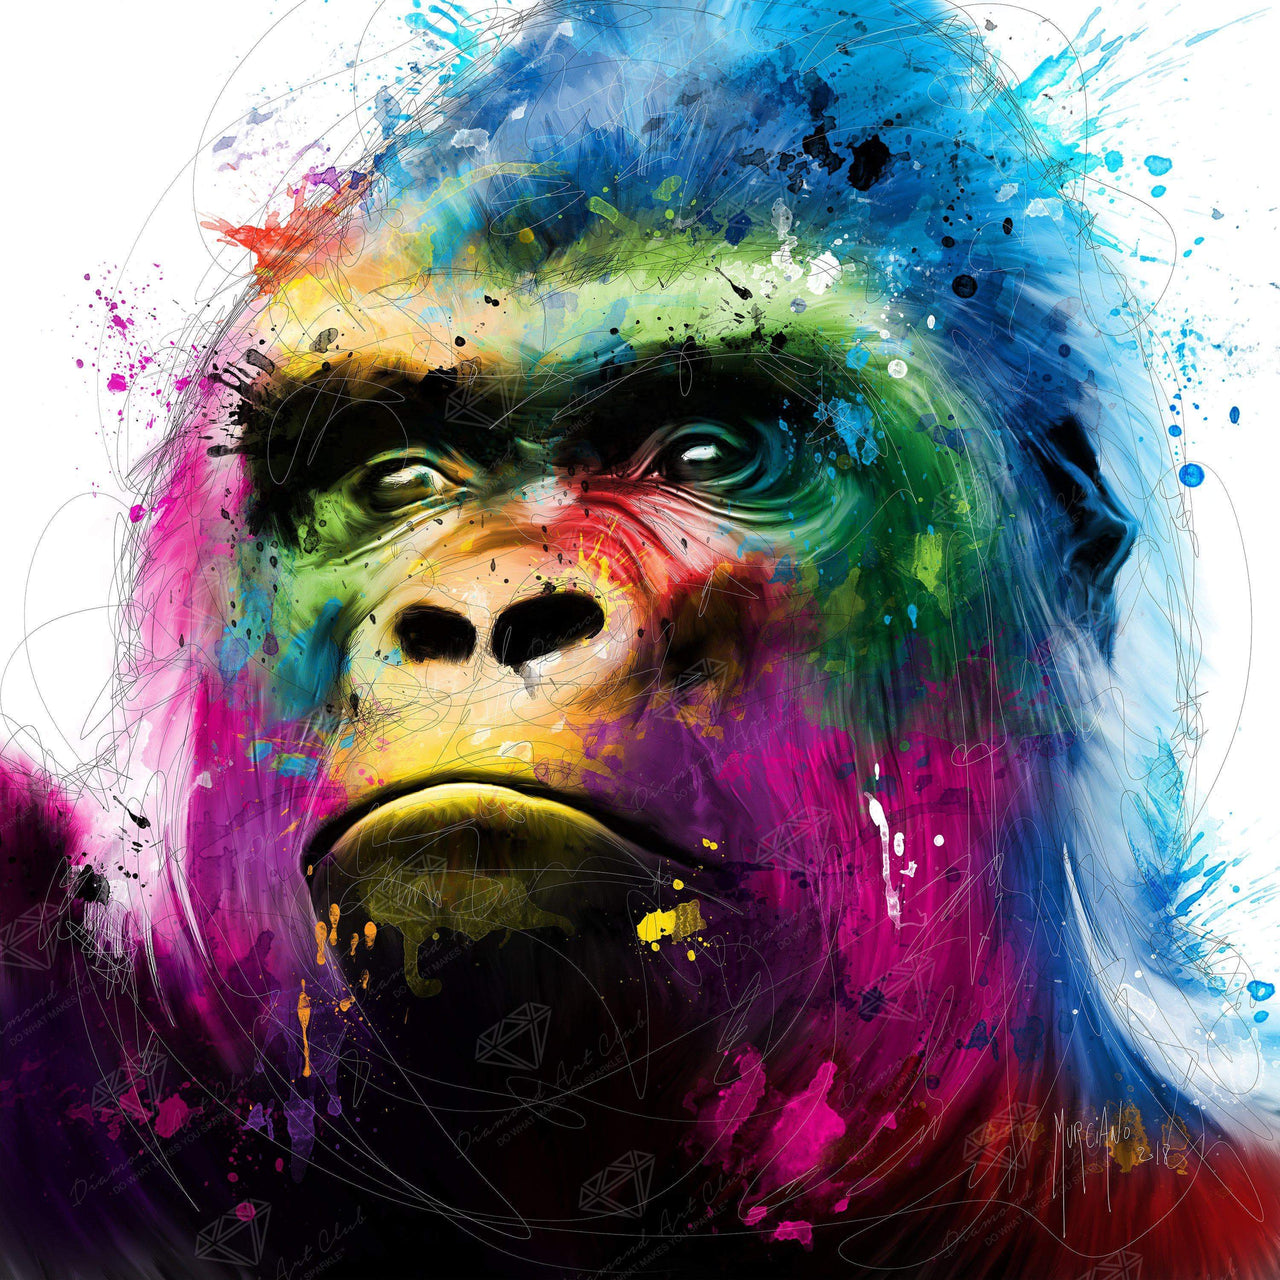 Diamond Painting Gorilla Round With 37 Colors Including 2 ABs / 14.6" x 14.6" (37cm x 37cm) / 17,161